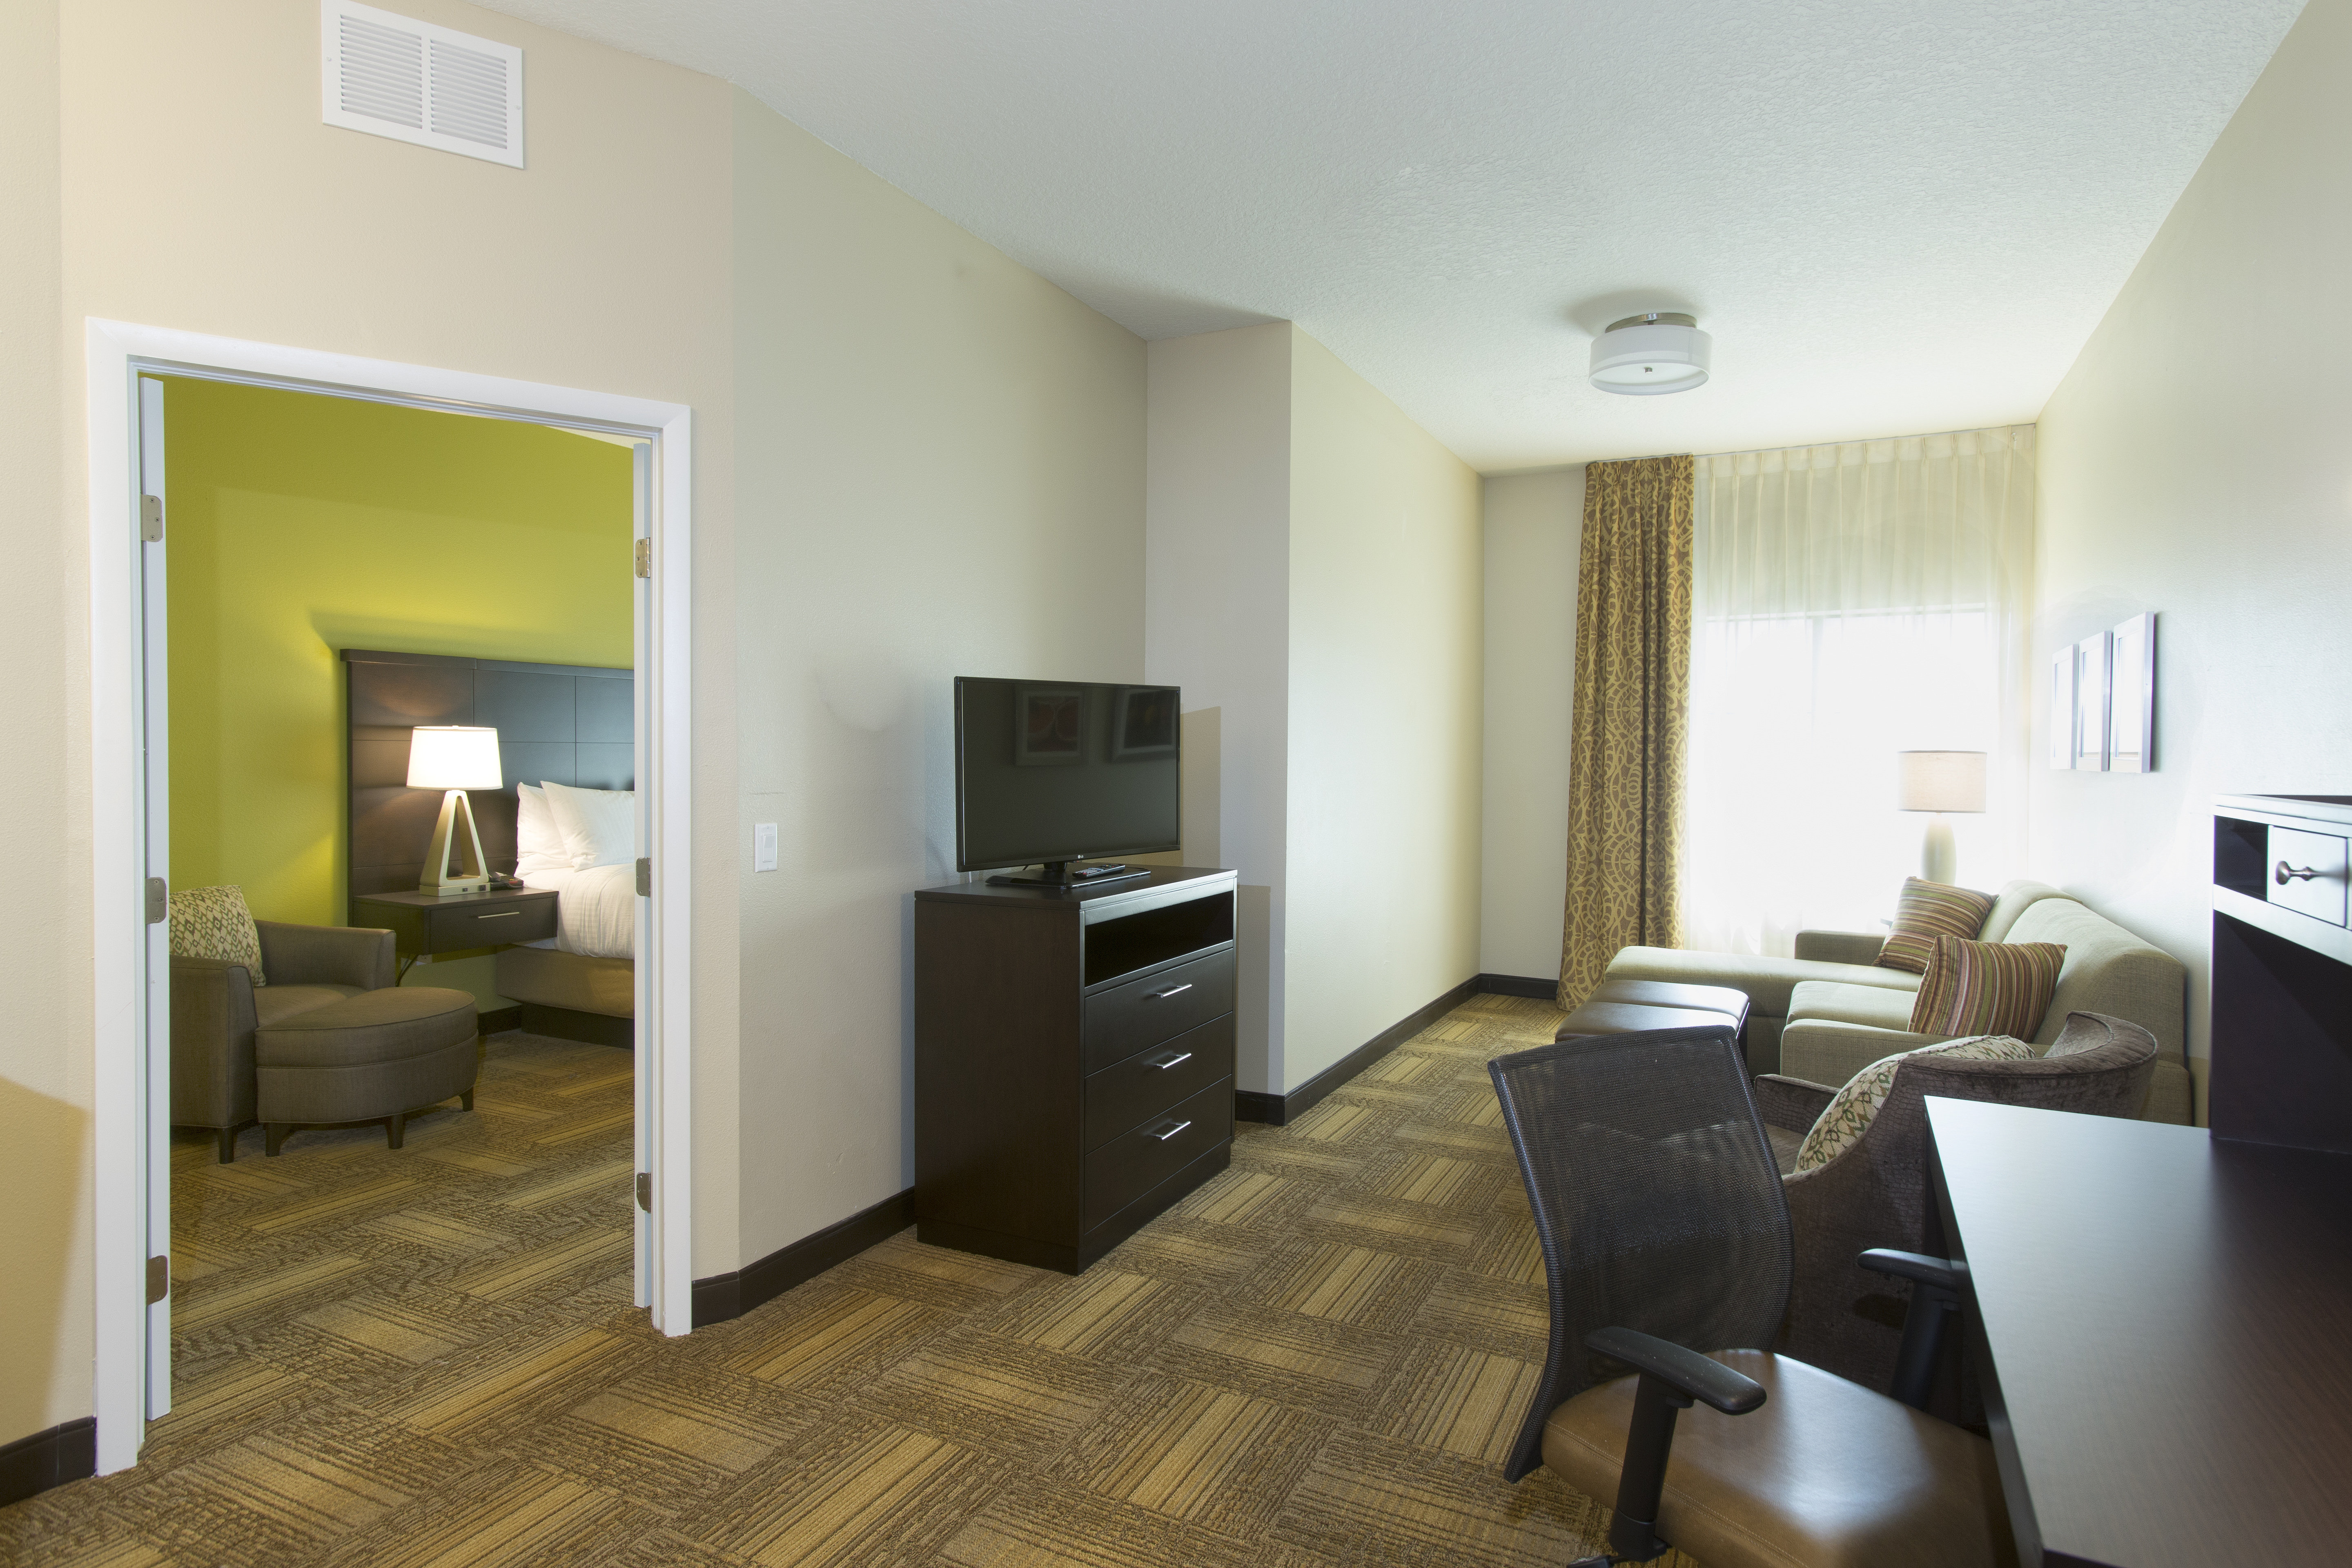 Our spacious suites are the perfect place when away from home